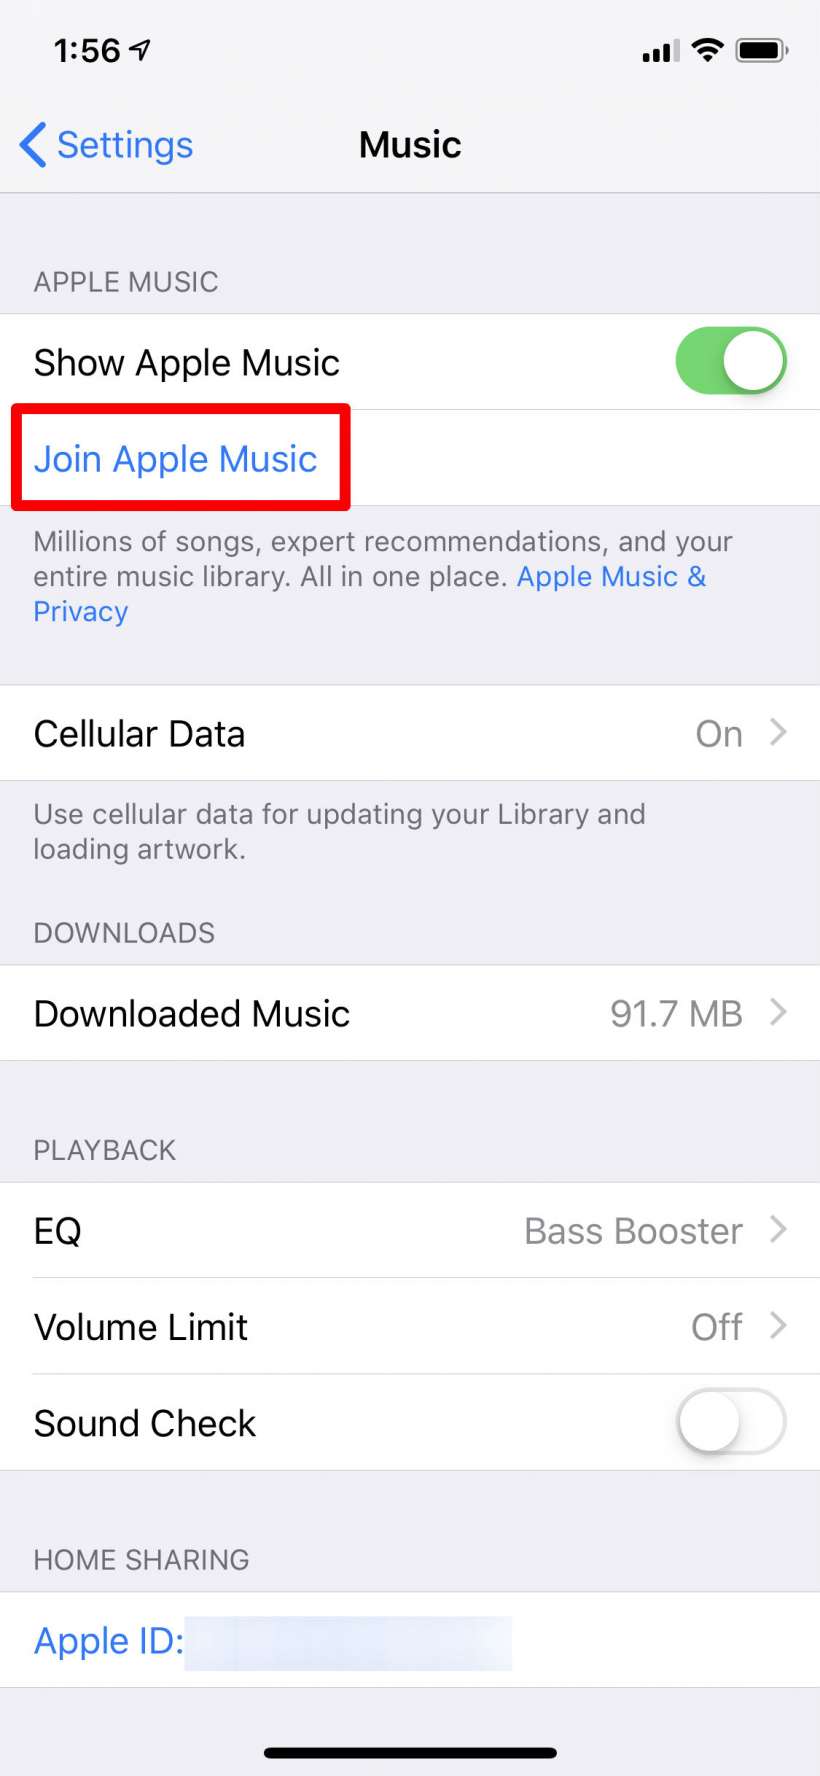 How to subscribe to 3 free months of Apple Music on iPhone and iPad.